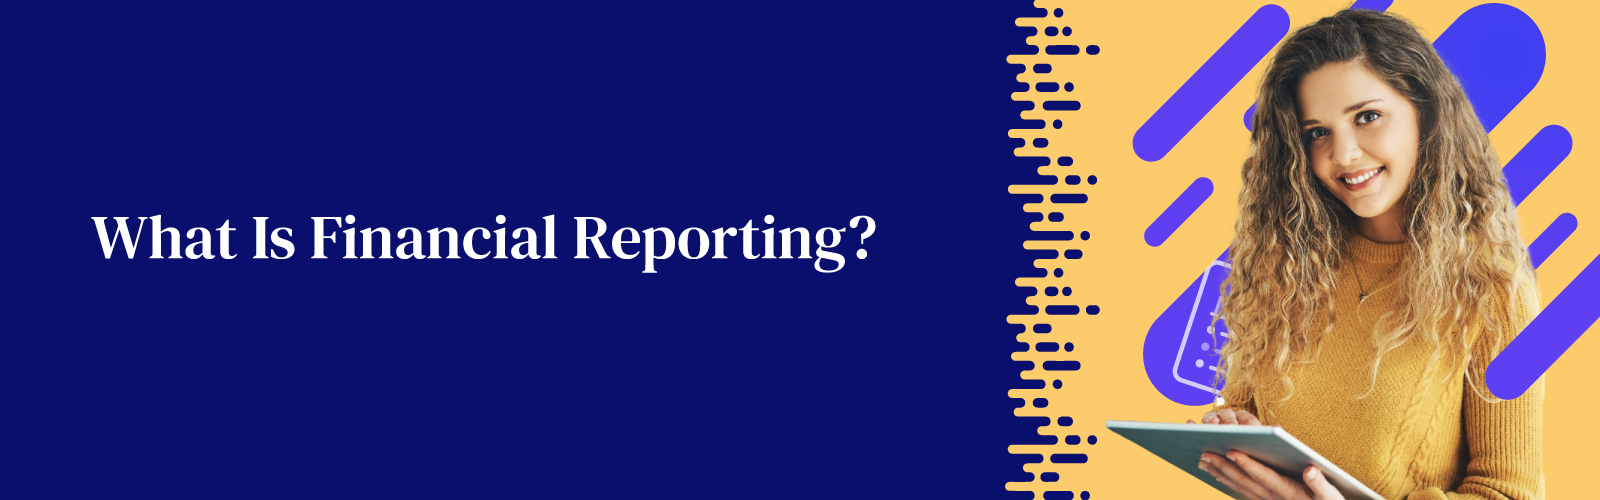 What Is Financial Reporting?